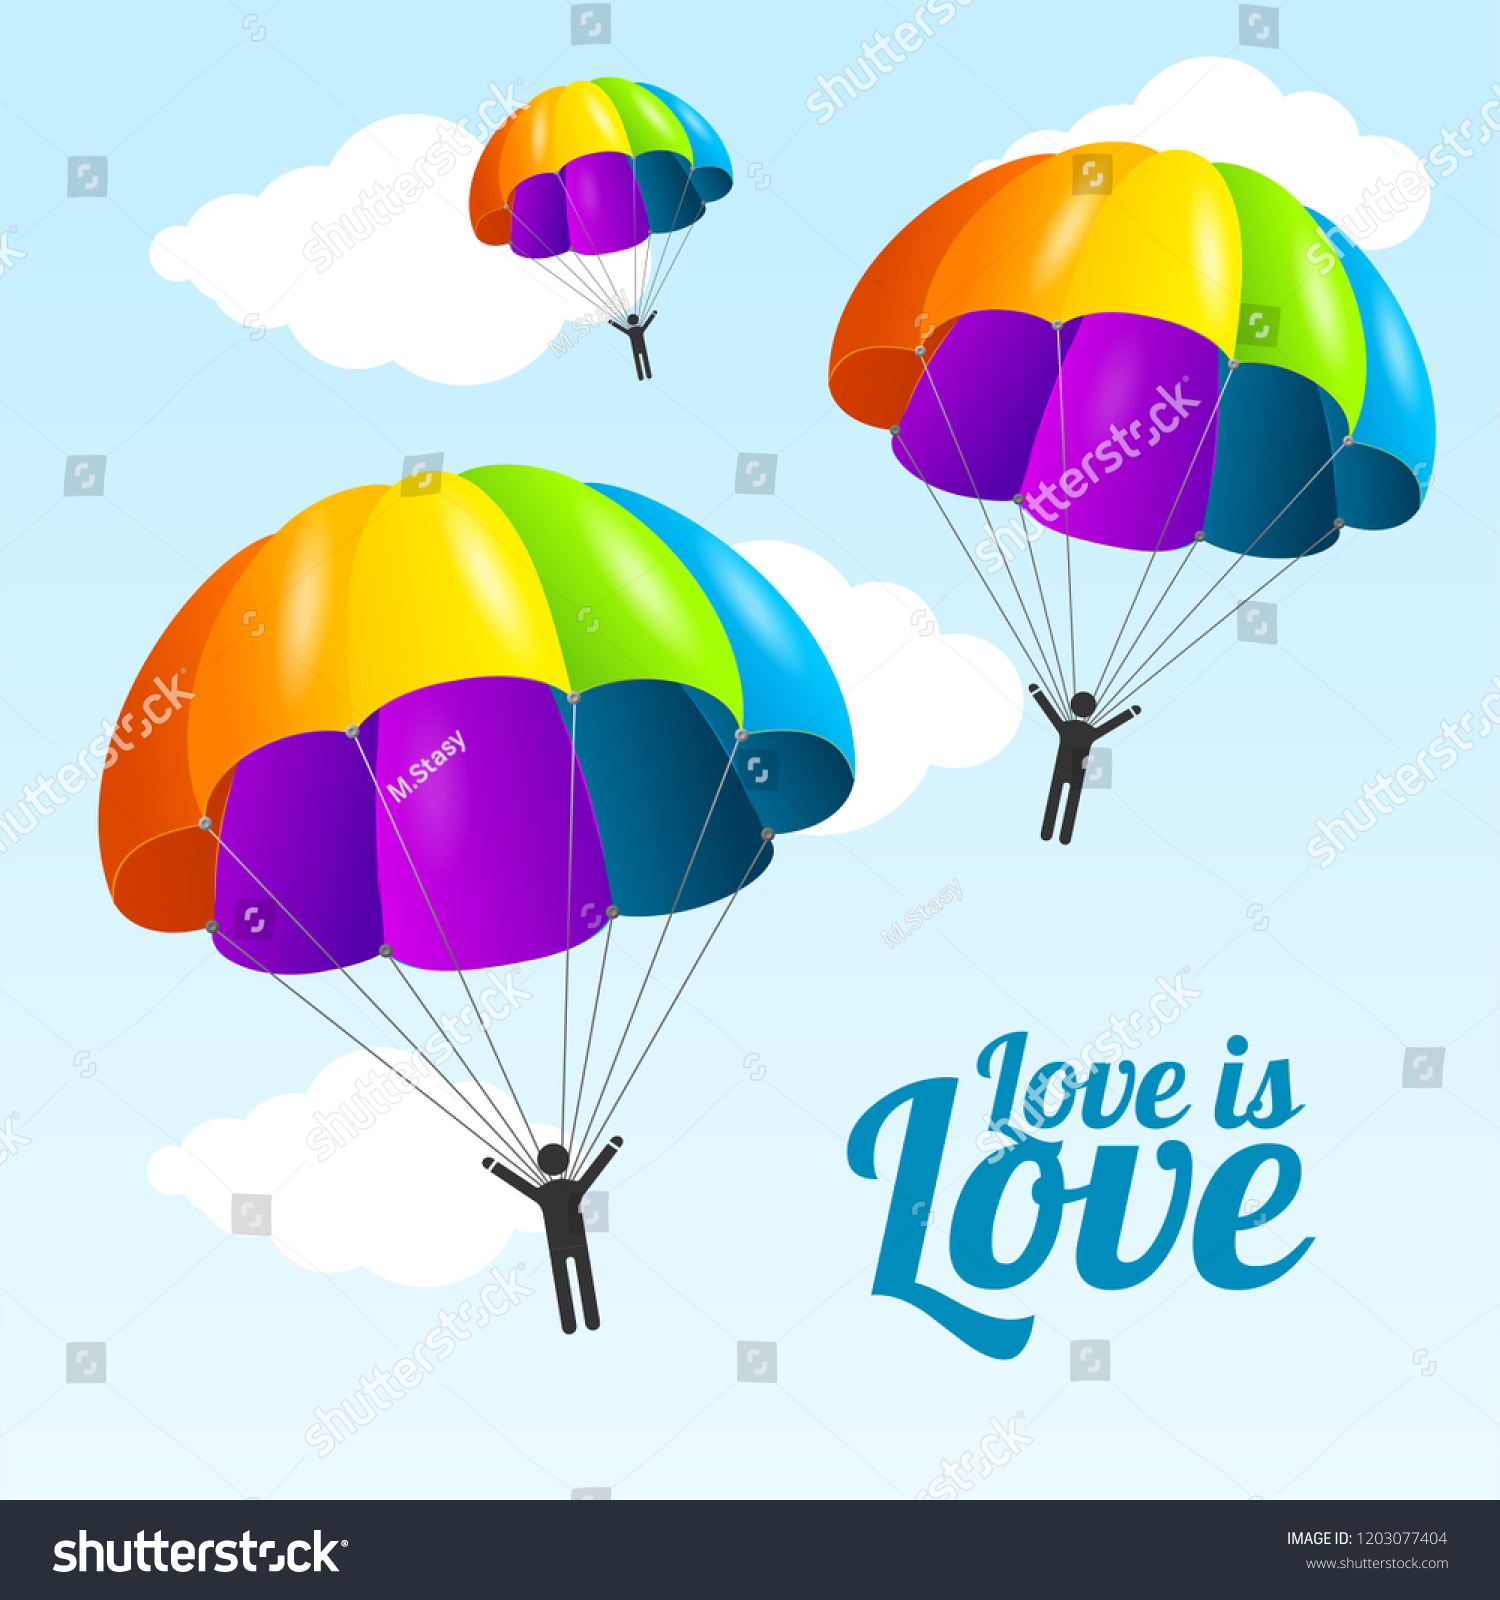 stock-vector-realistic-detailed-d-rainbow-parachute-and-people-lgbt-friendly-concept-homosexual-community-1203077404.jpg